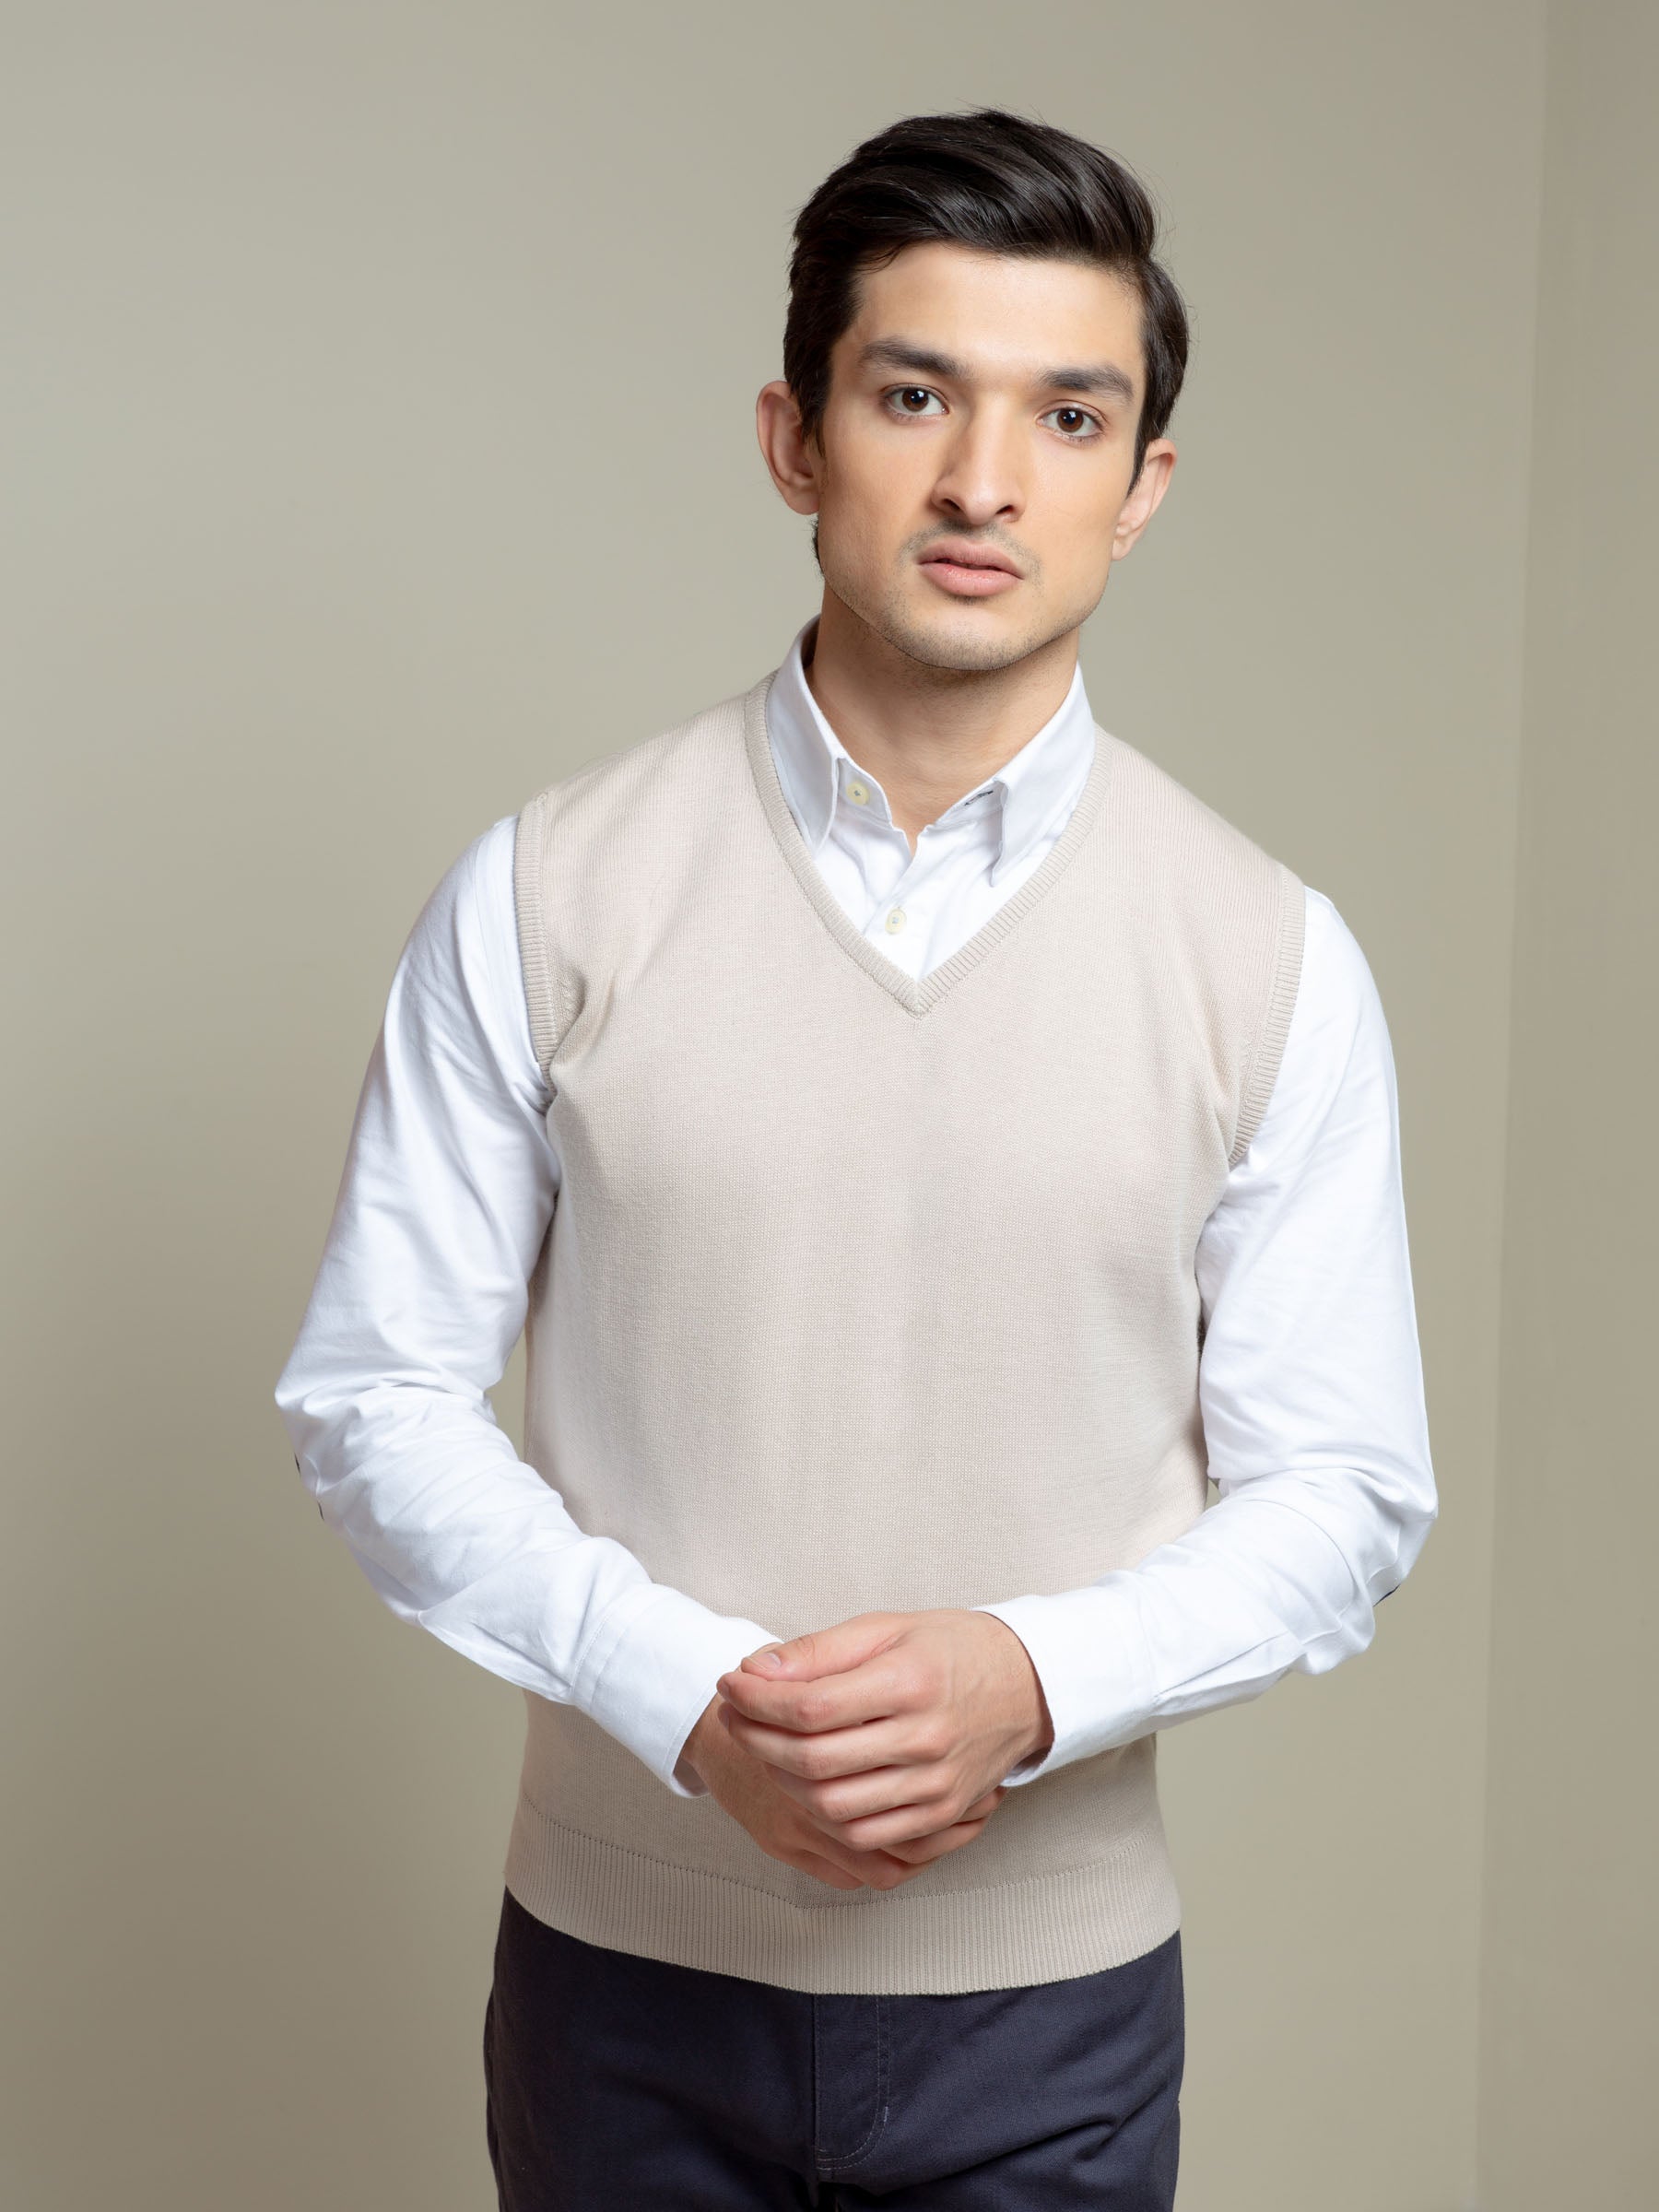 cashmere clothes from pakistan